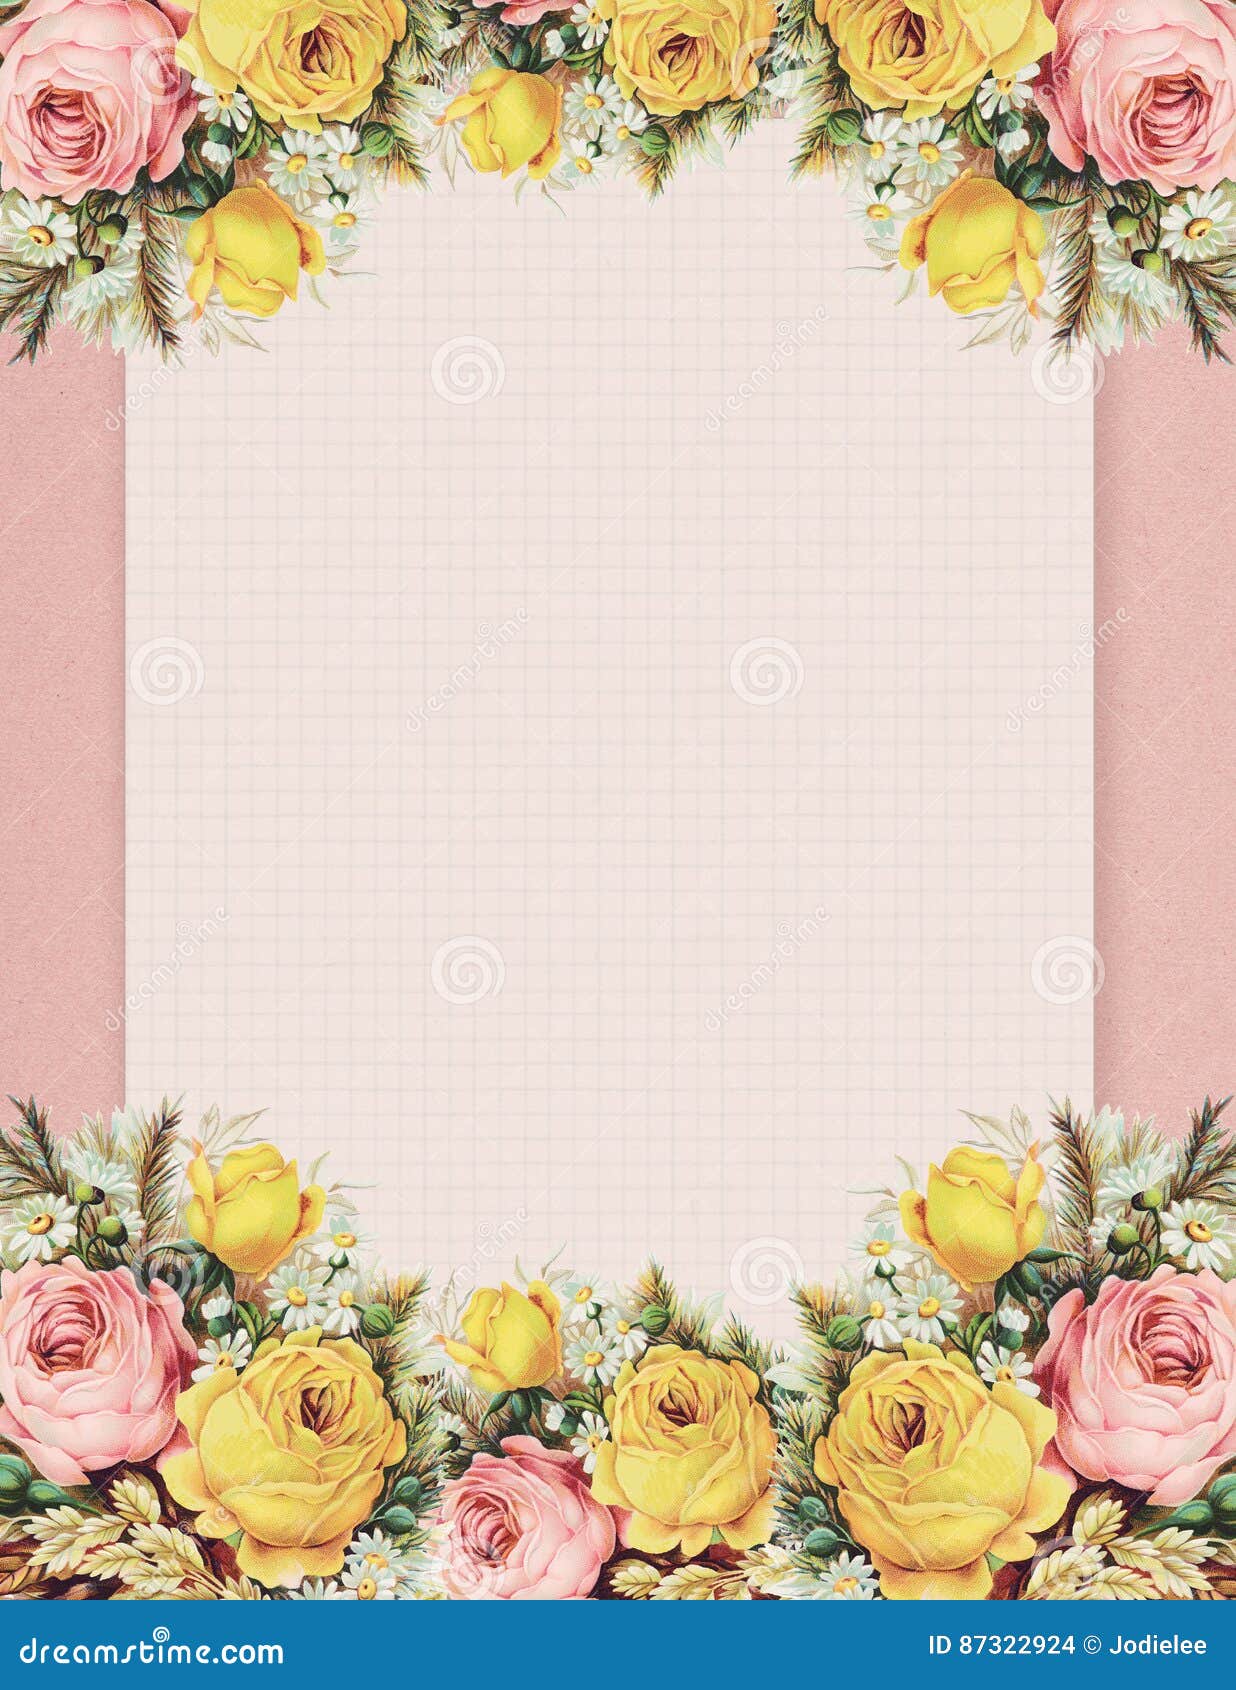 Printable Stationary - Vintage Roses - Snap Click Supply Co.